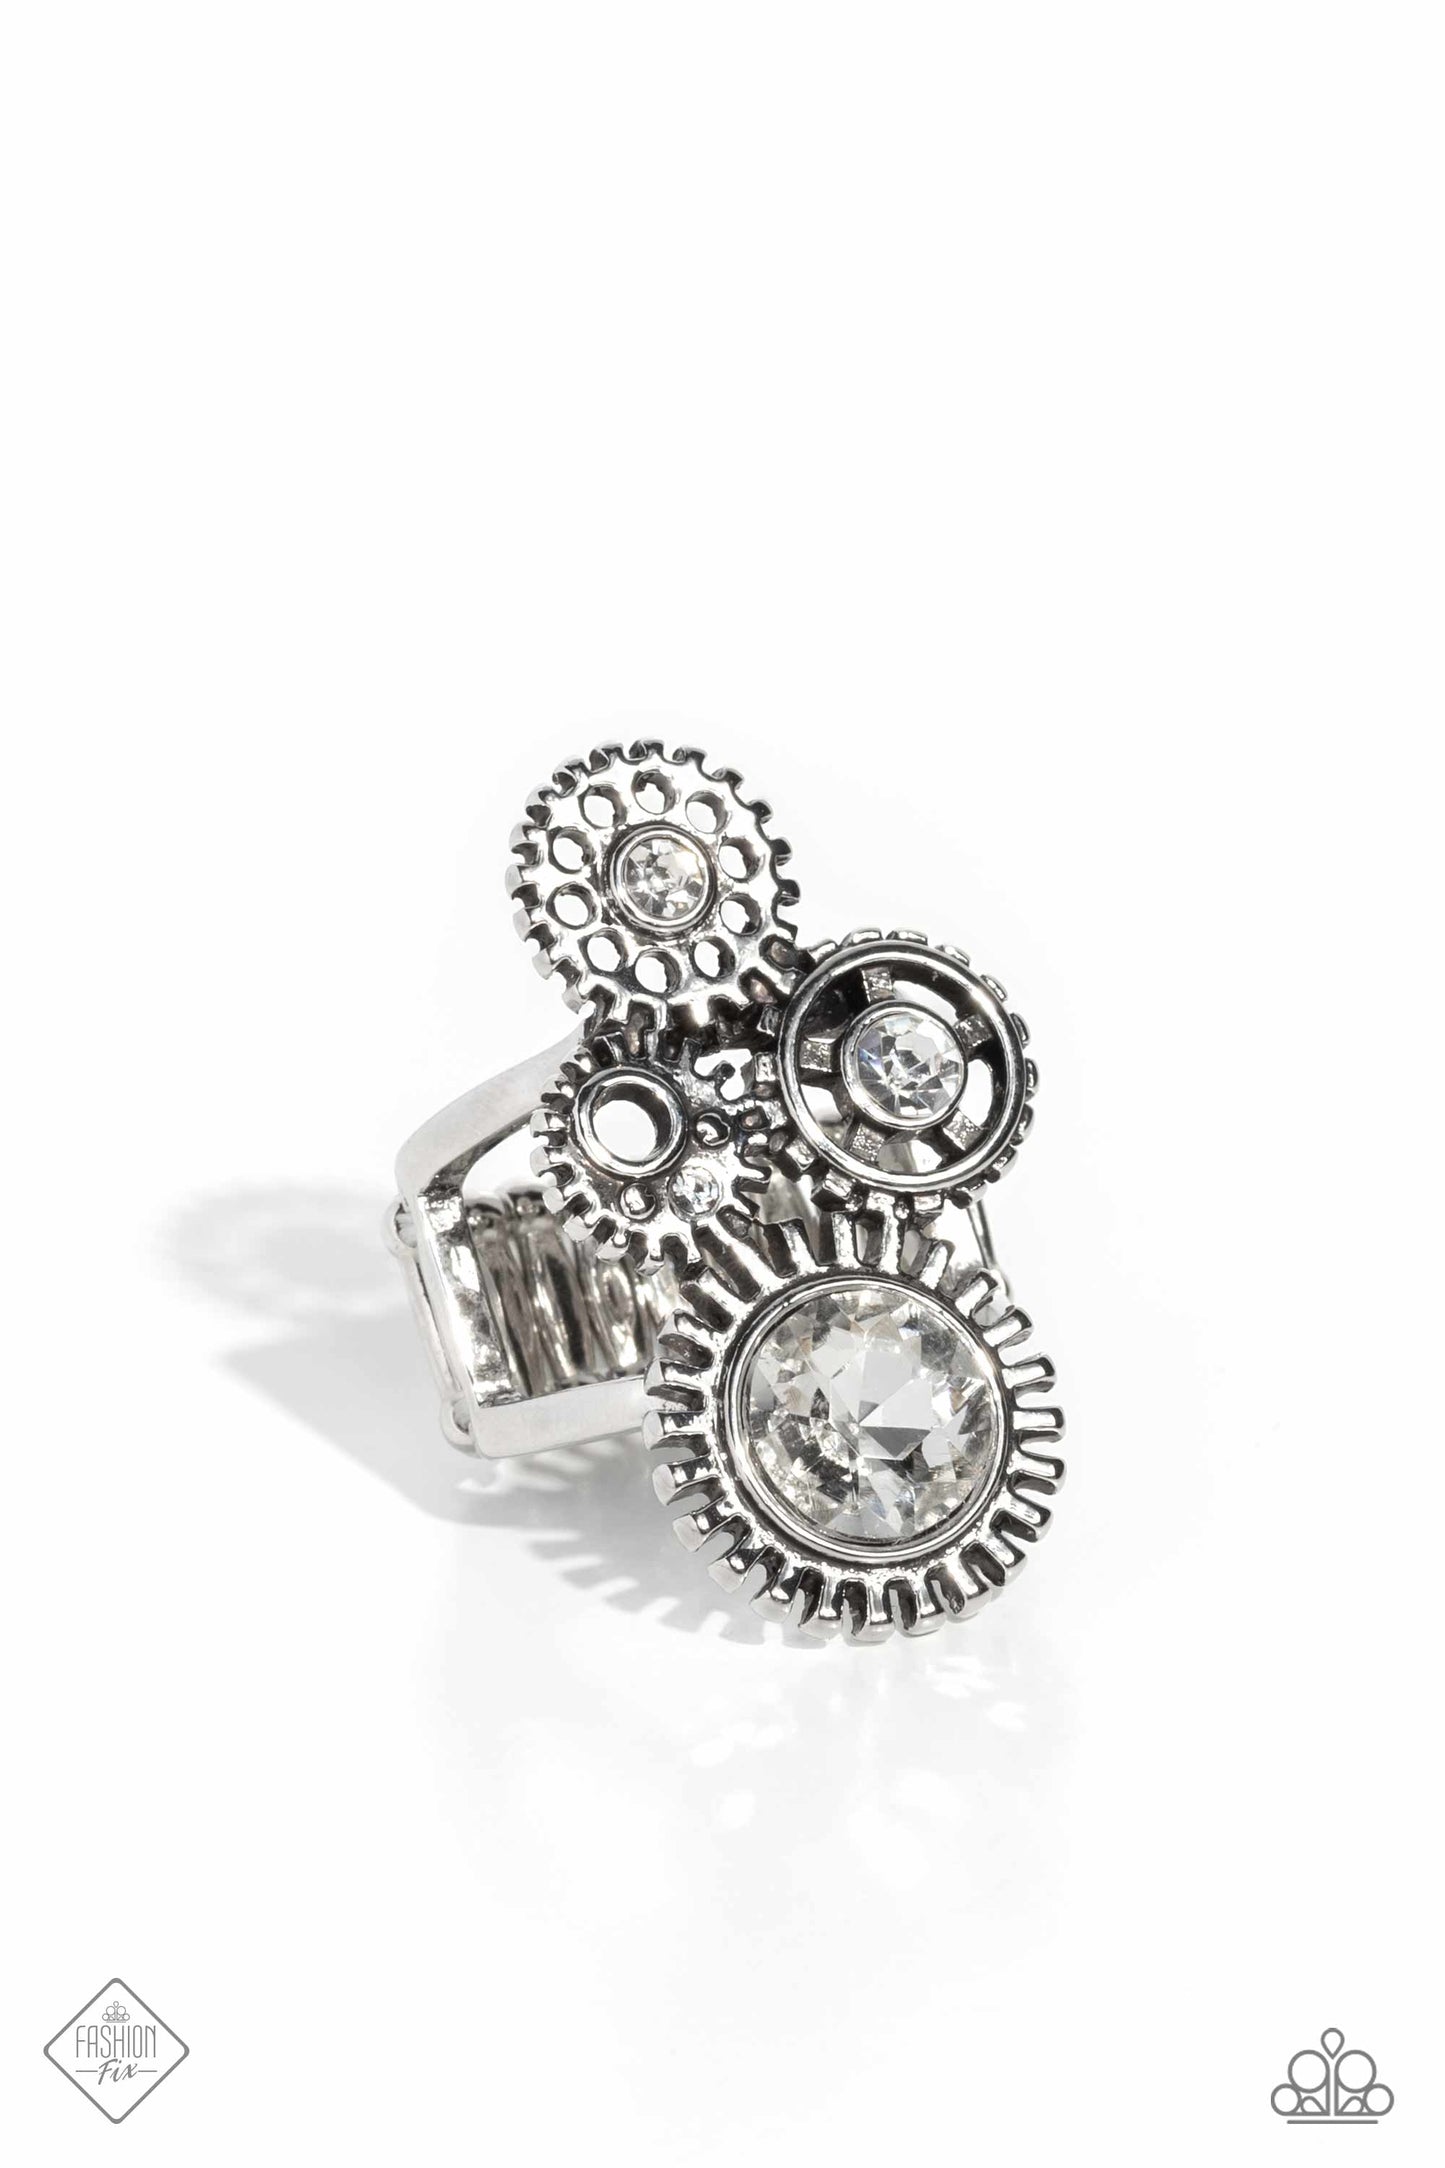 Blowing Off STEAMPUNK - White (MM0423)